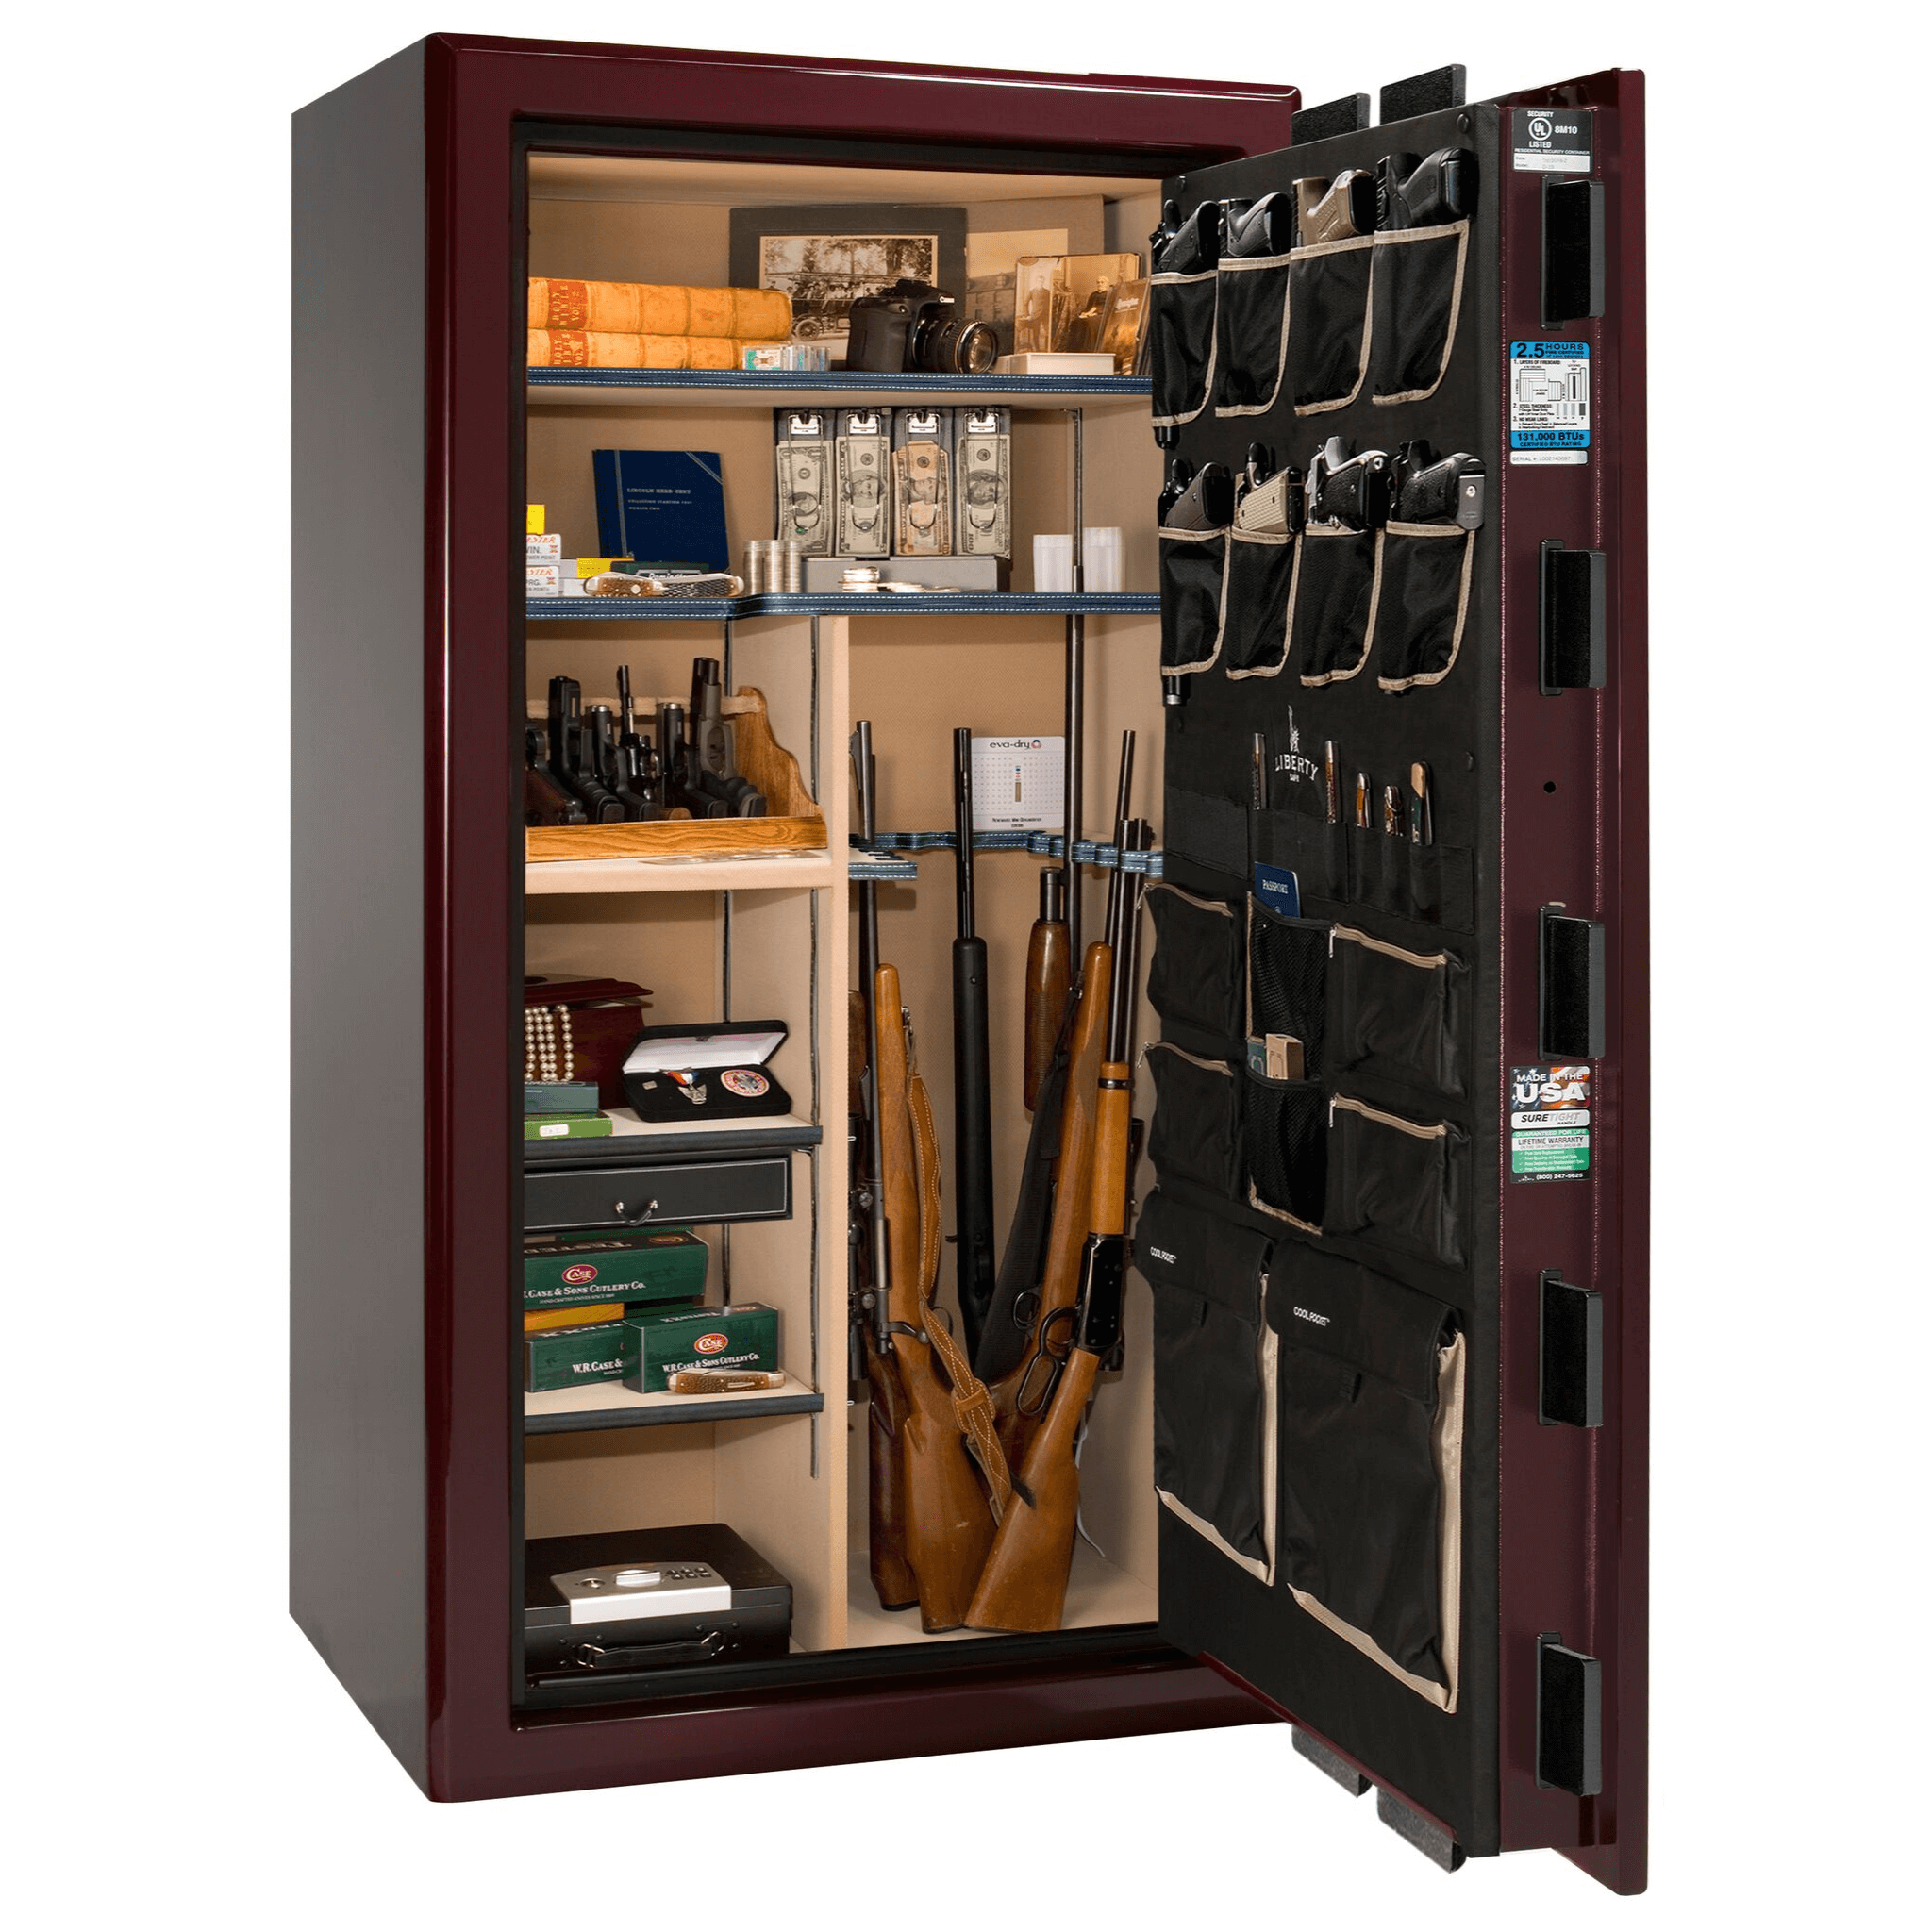 Presidential Series | Level 8 Security | 2.5 Hours Fire Protection | 40 | Dimensions: 66.5"(H) x 36.25"(W) x 32"(D) | Burgundy Gloss | Gold Hardware | Electronic Lock